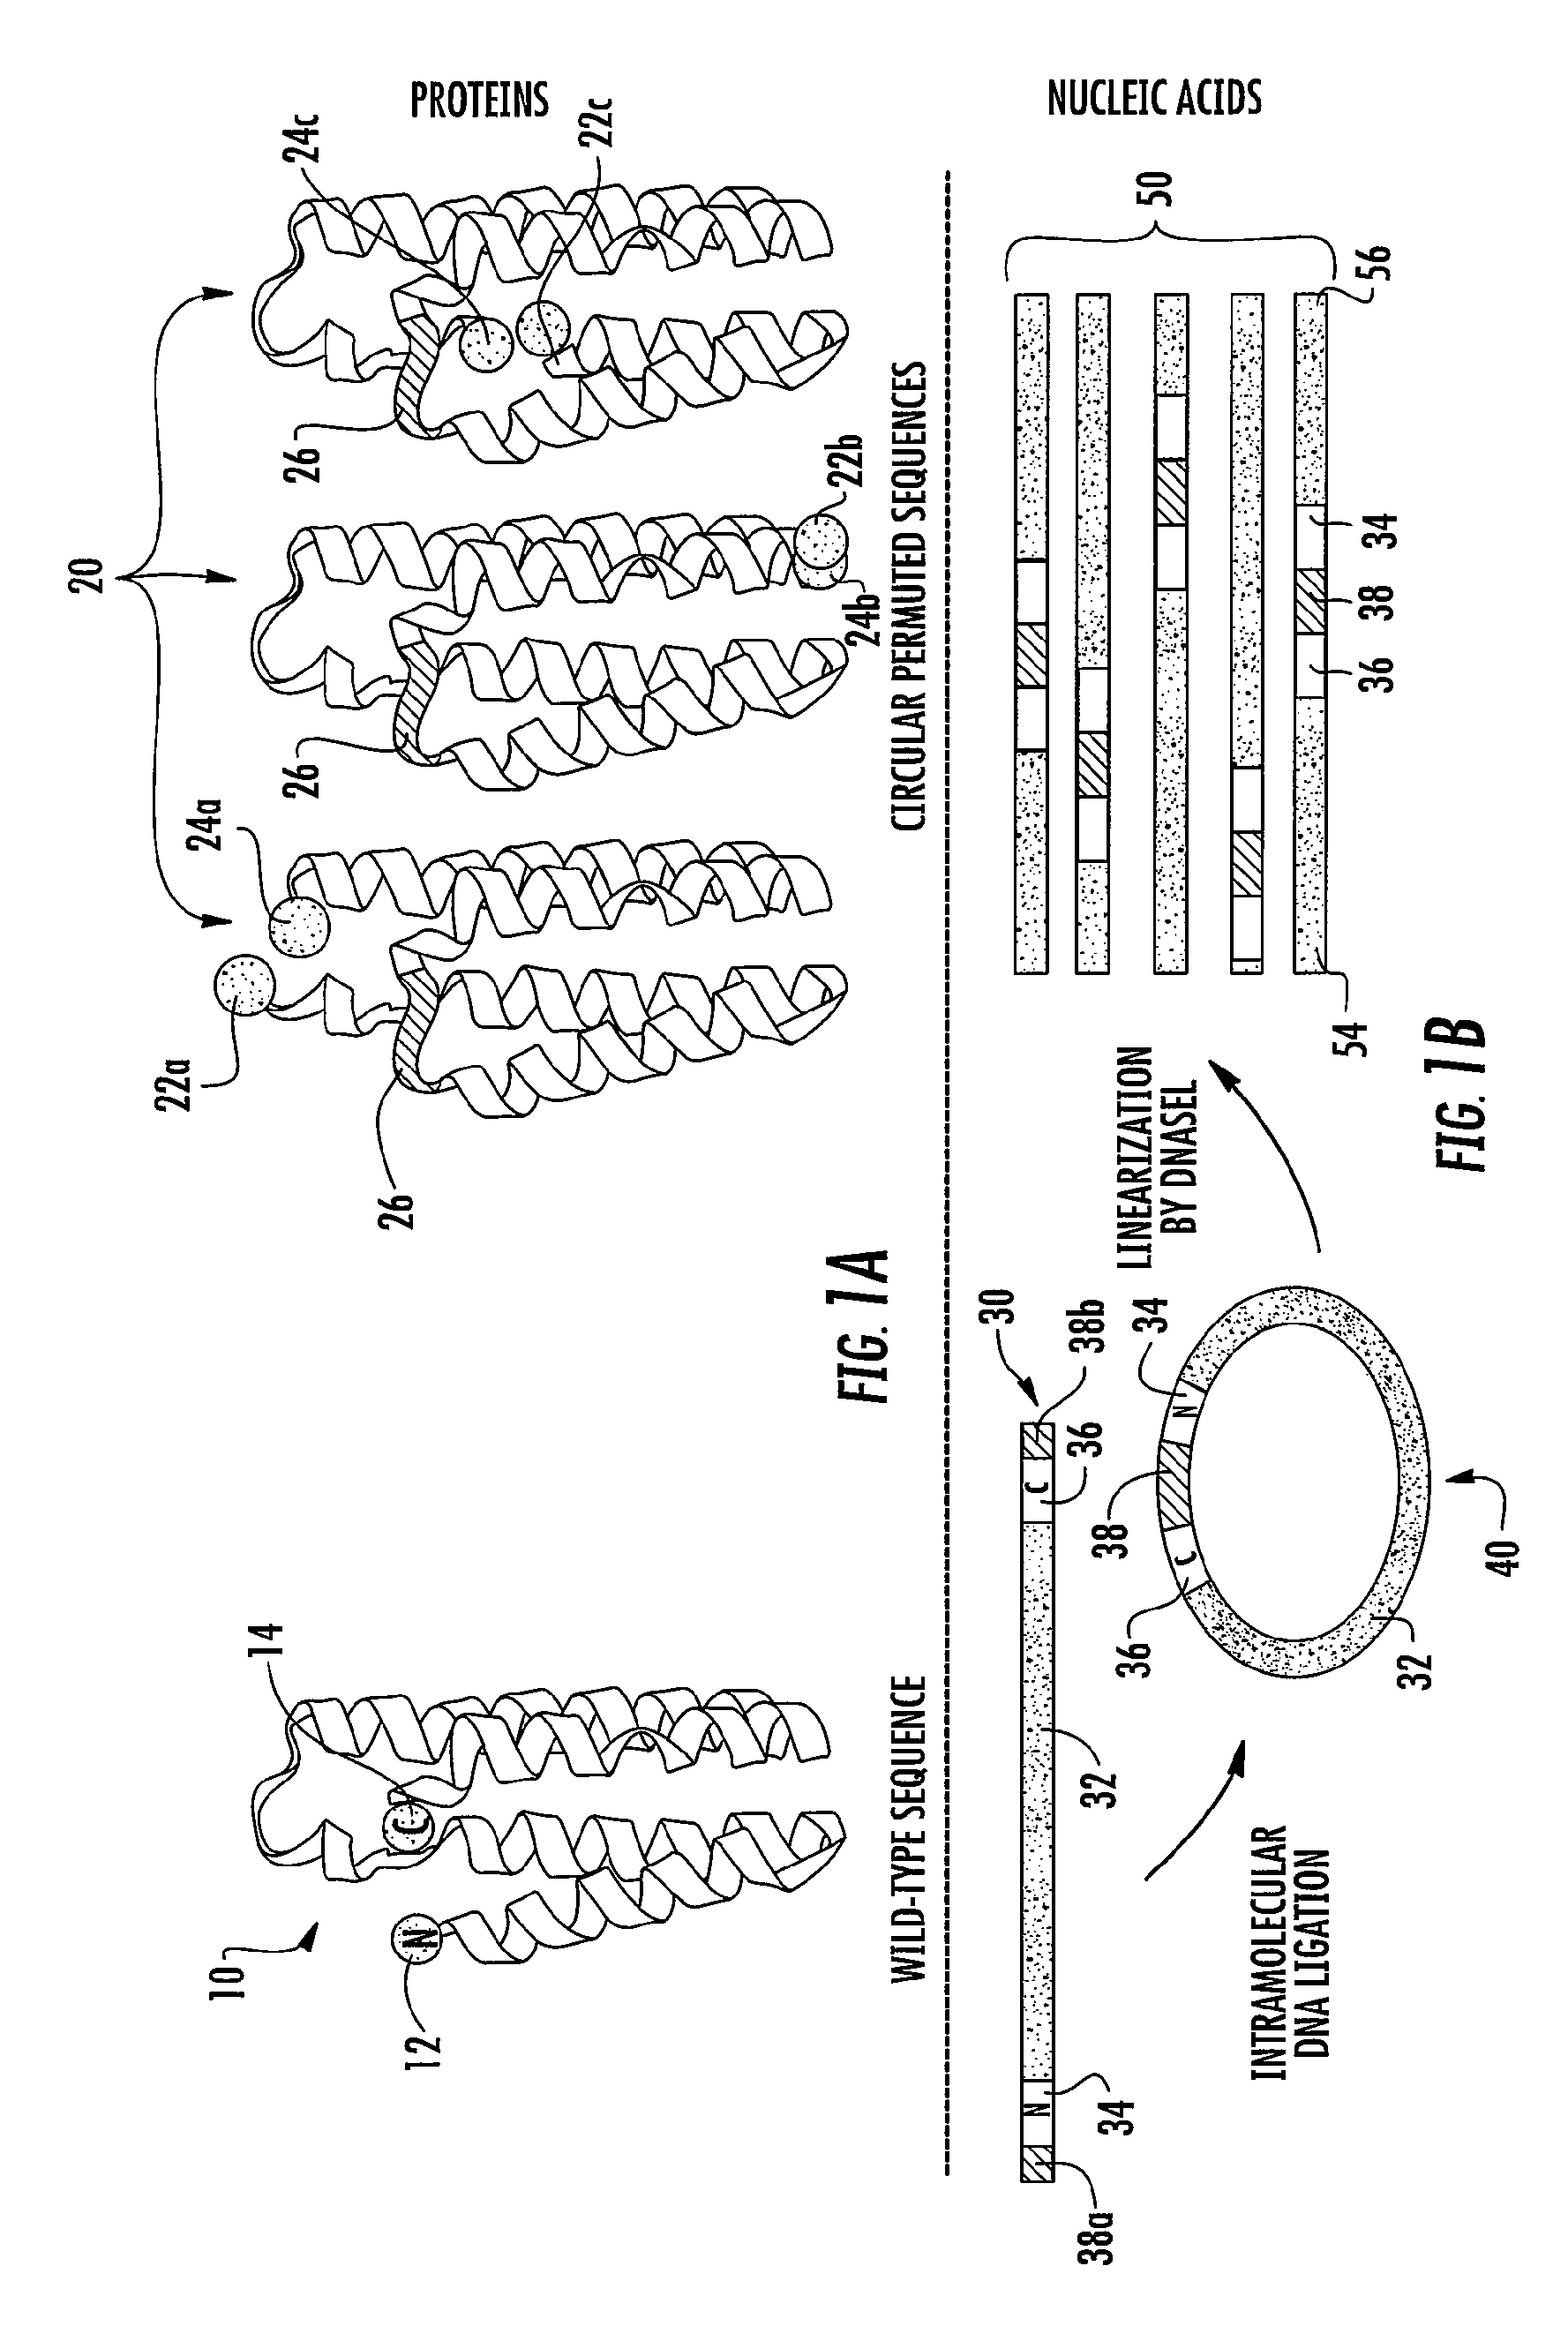 Proteins with enhanced functionality and methods of making novel proteins using circular permutation